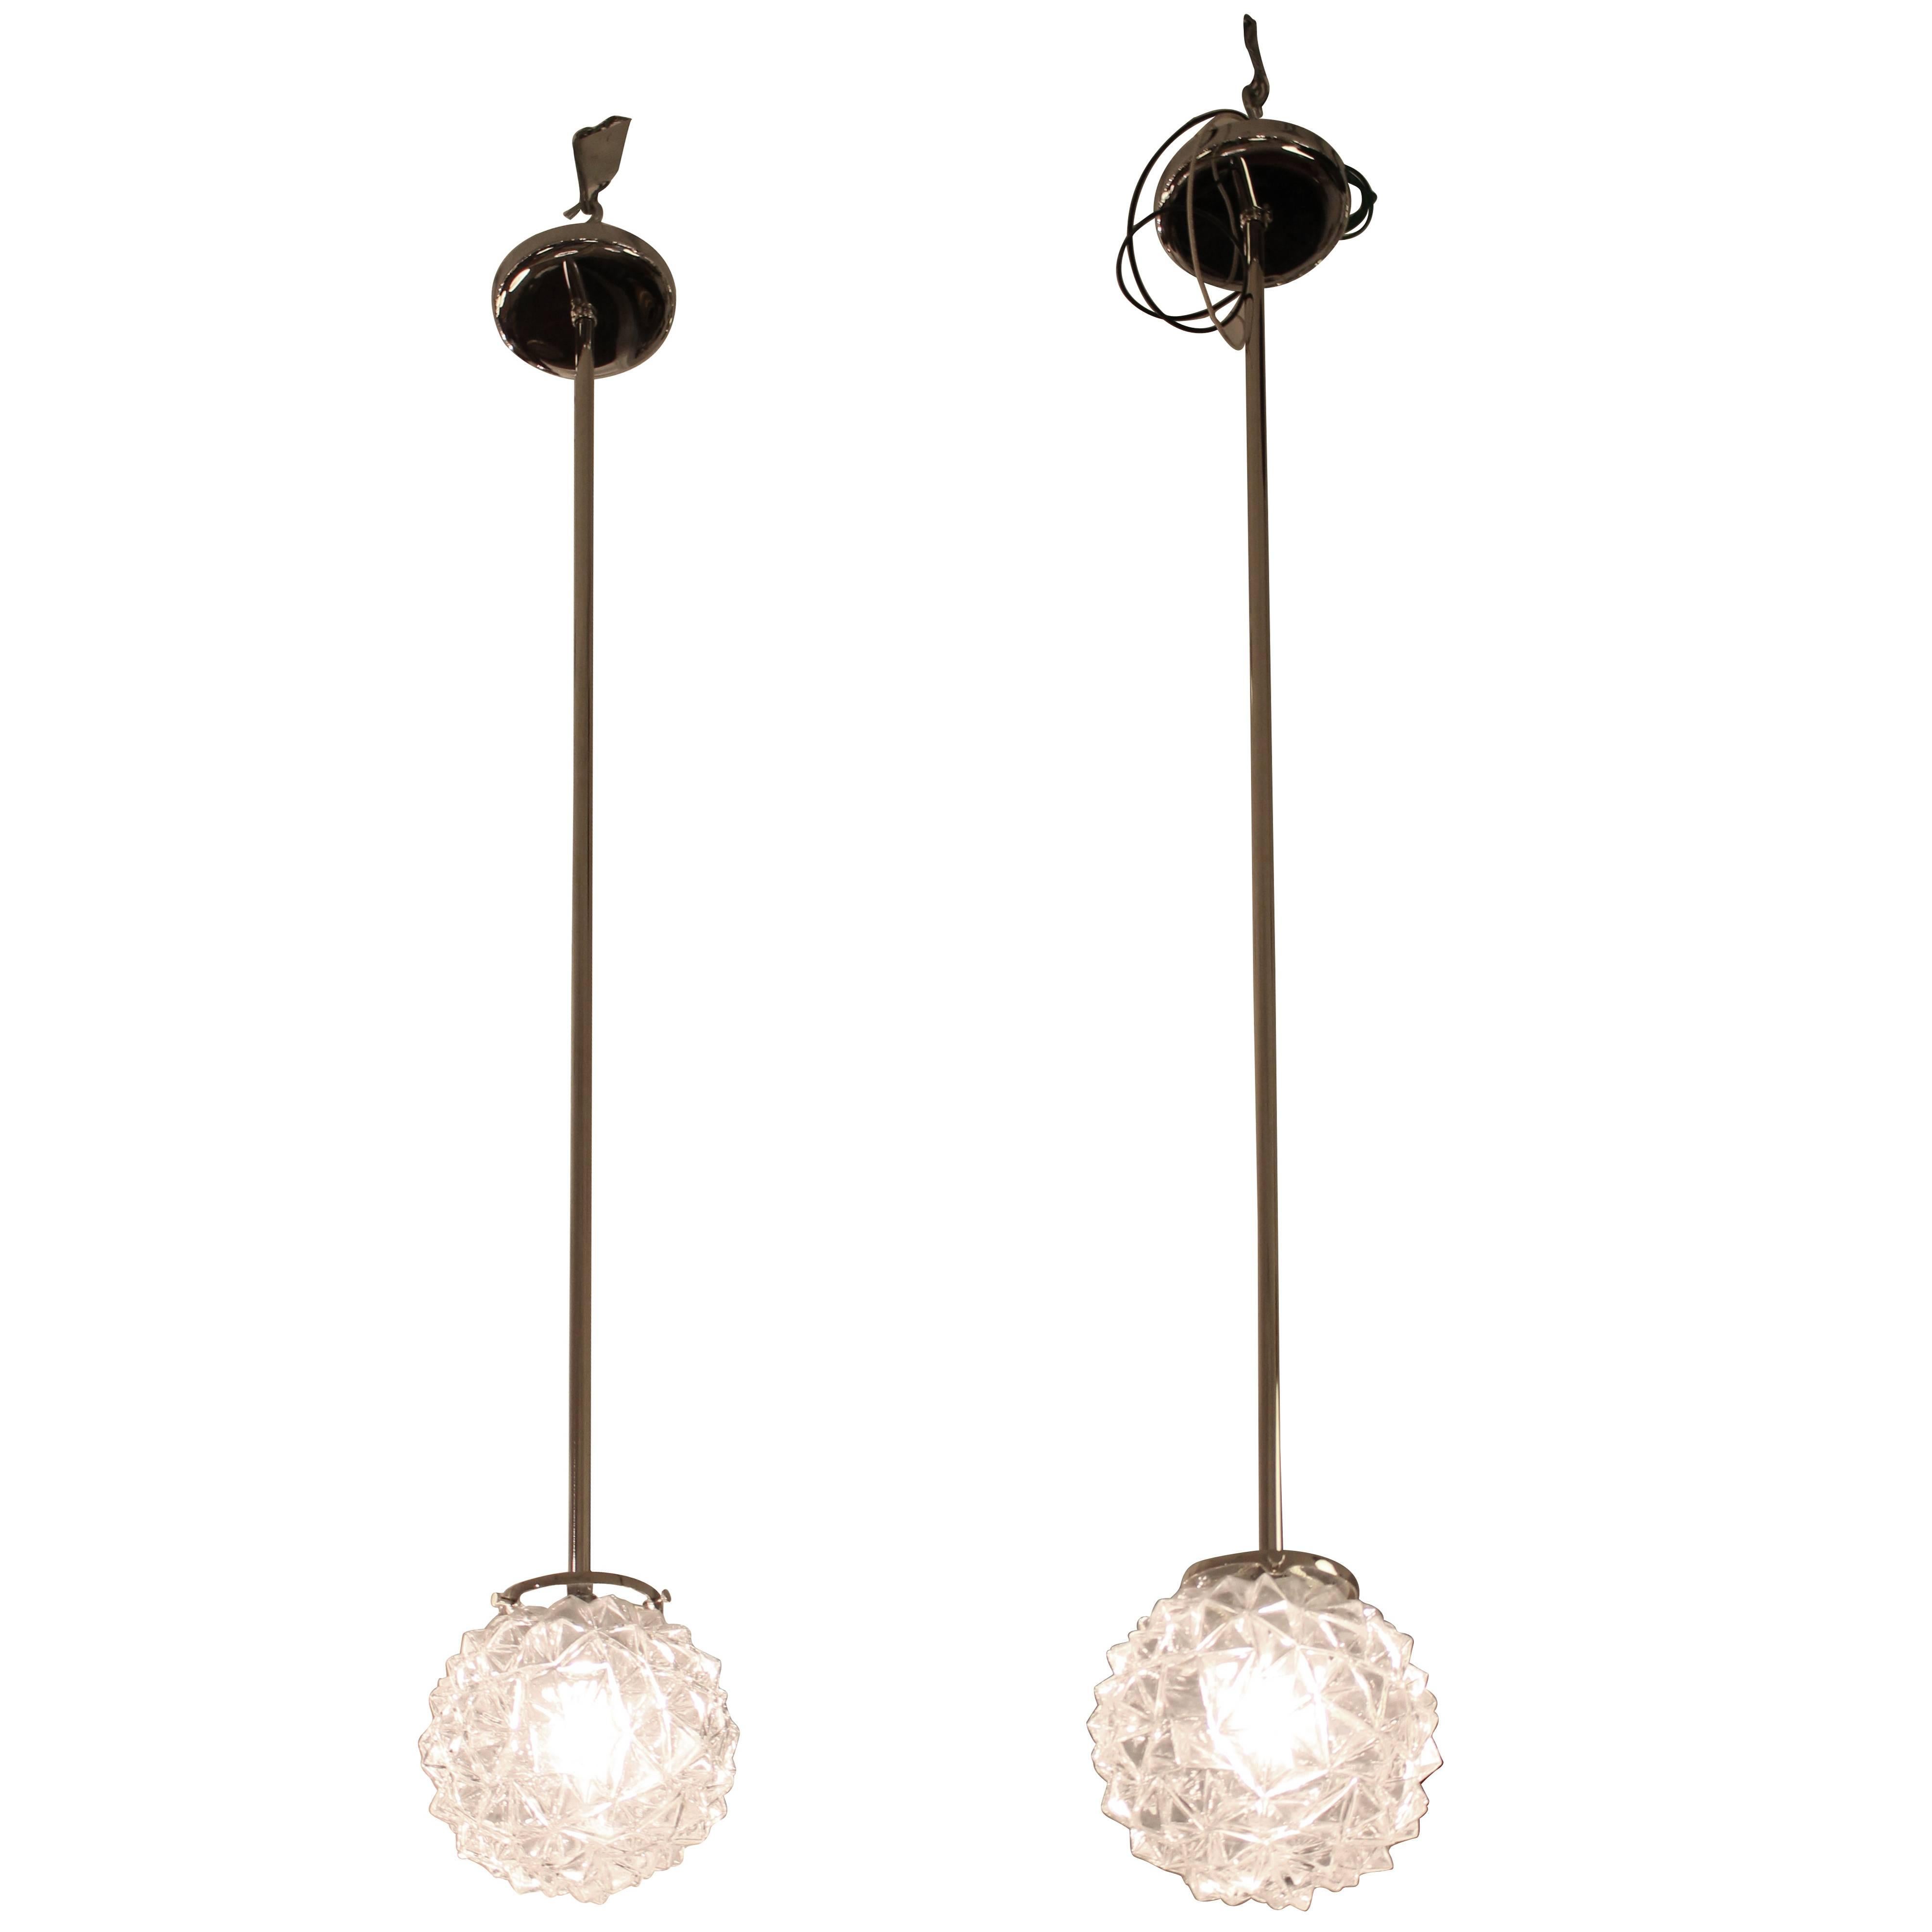 1950s Mid-Century Modern Pendant Lights with Porcupine Ball Glass